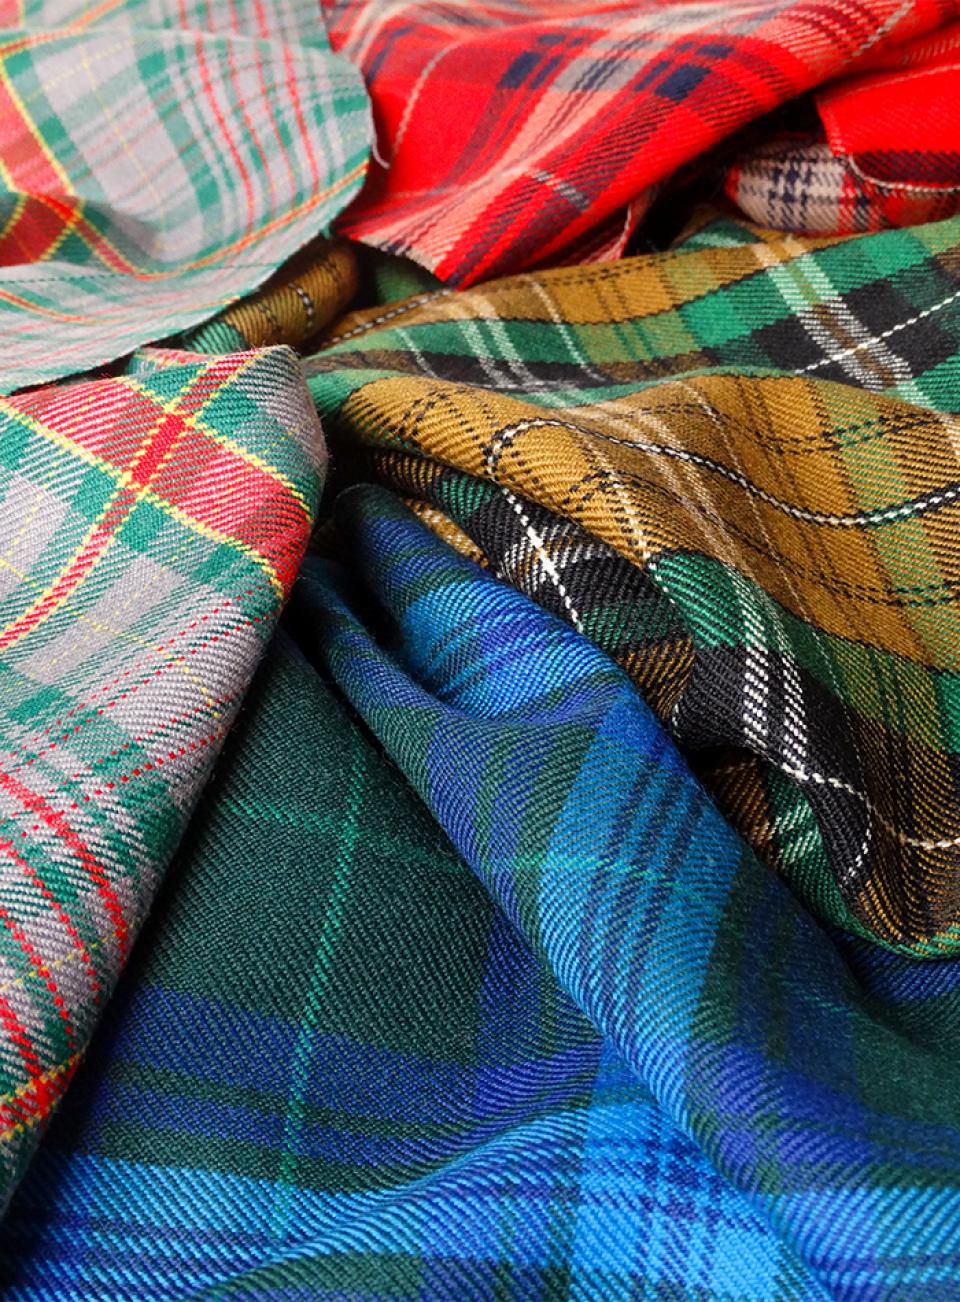 5kg Box of Assorted Tartan Offcuts (UK ONLY)